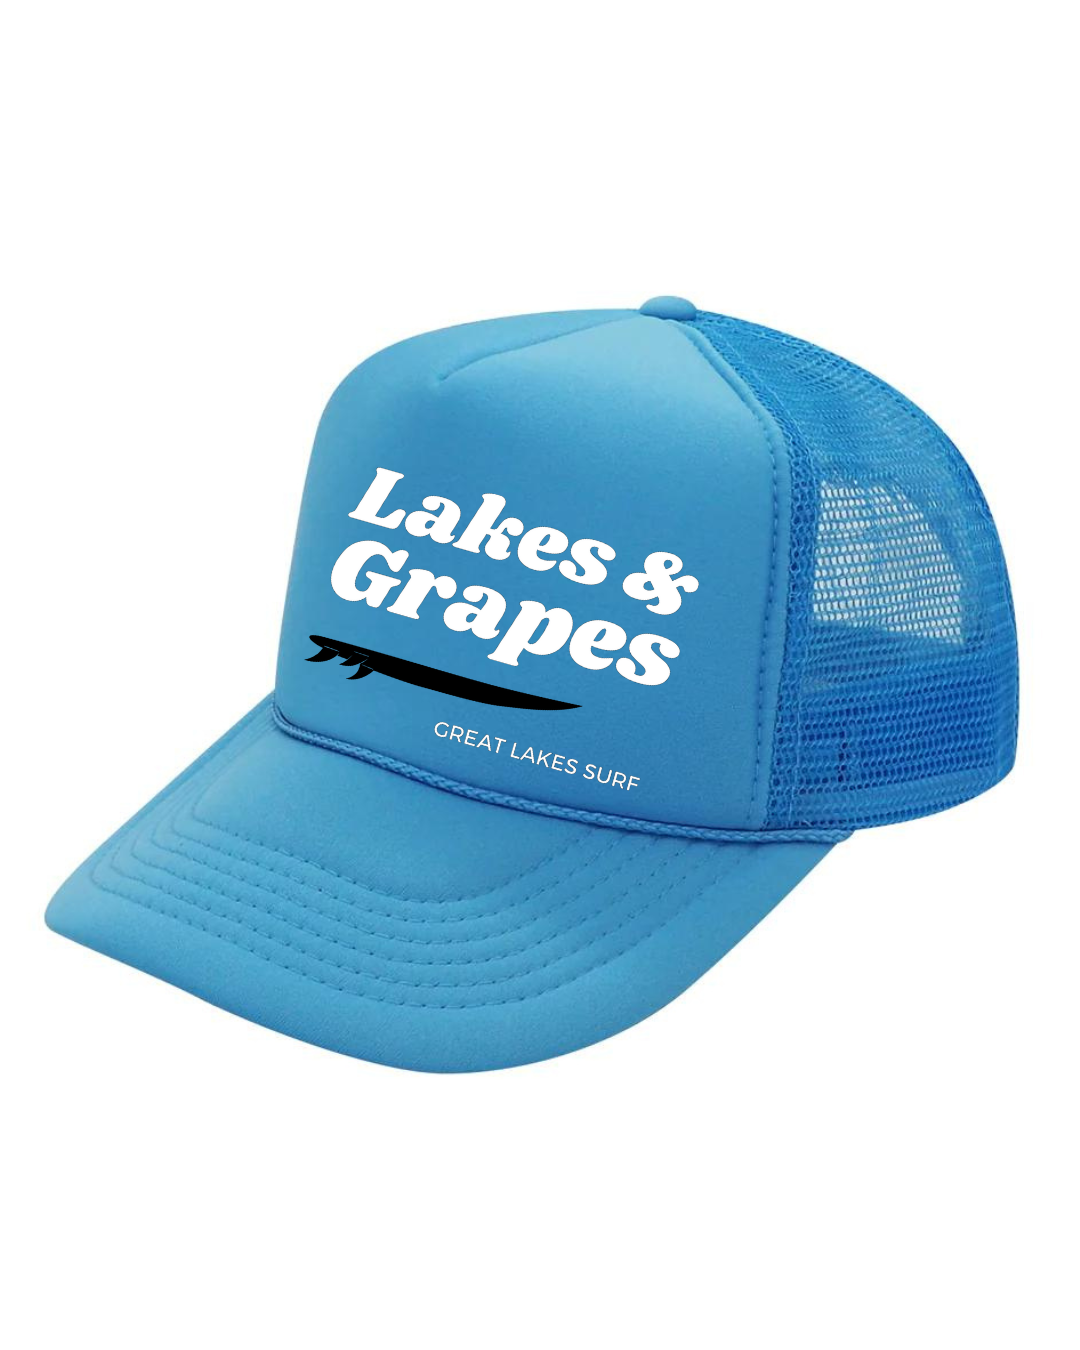 In this image, we see a Lakes and Grapes Blue Great Lakes Surf Trucker Hat. Experience comfort and style as you embrace the spirit of the Great Lakes.